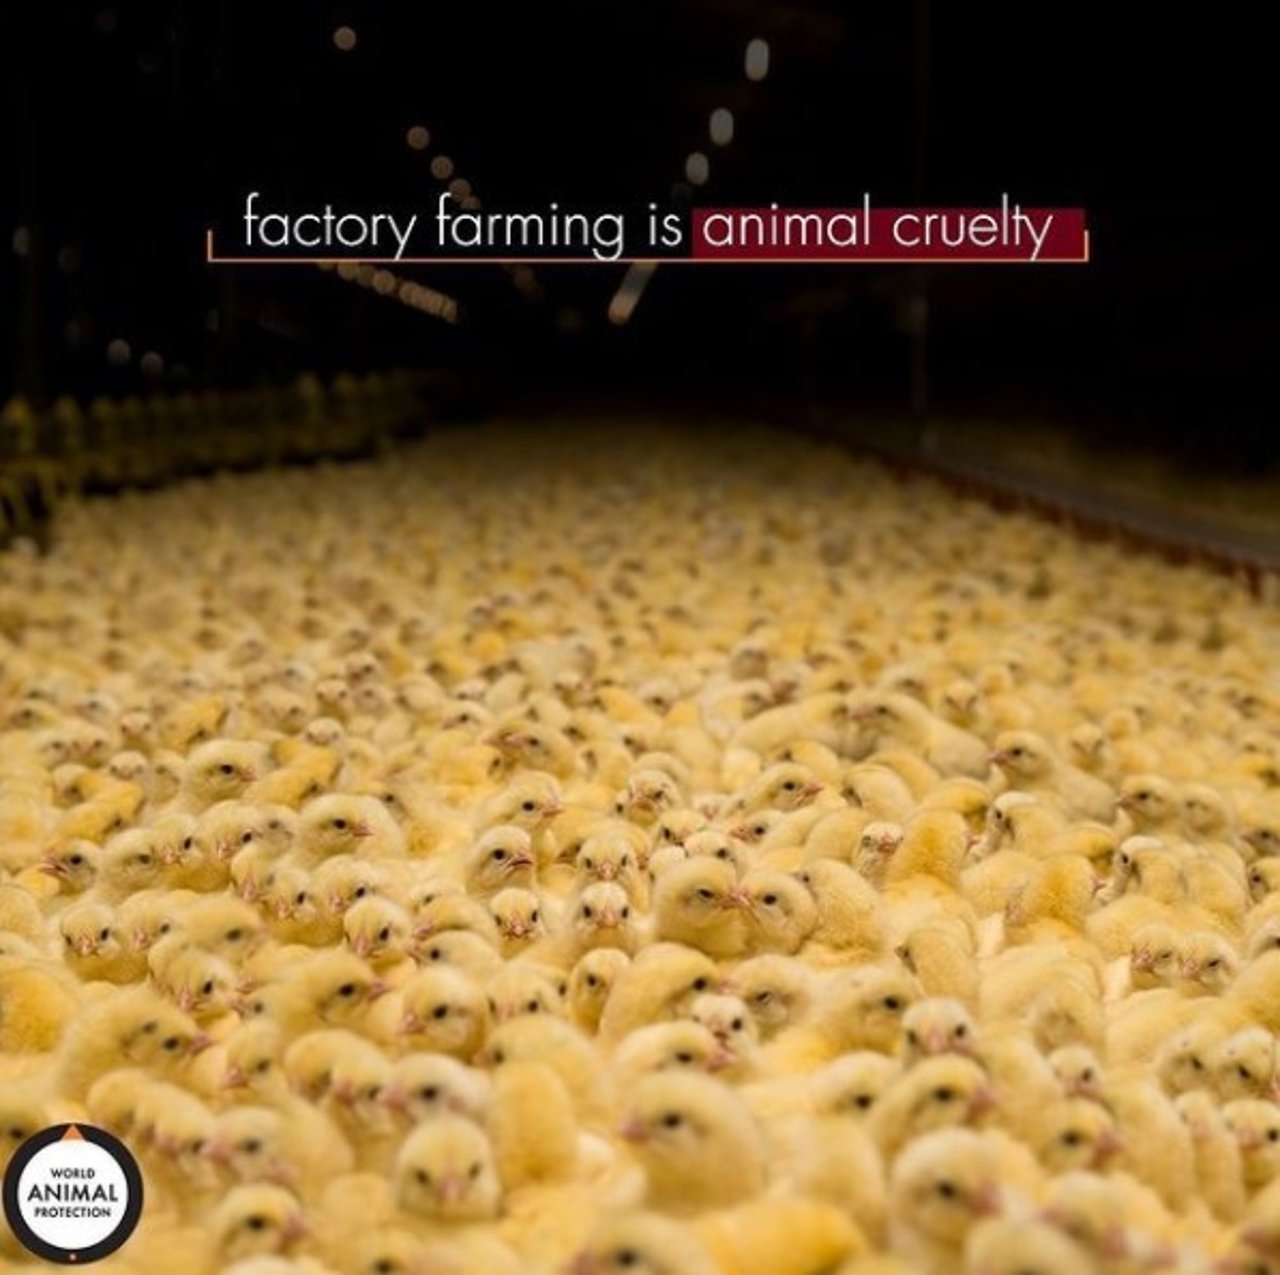 Factory farming is cruelty